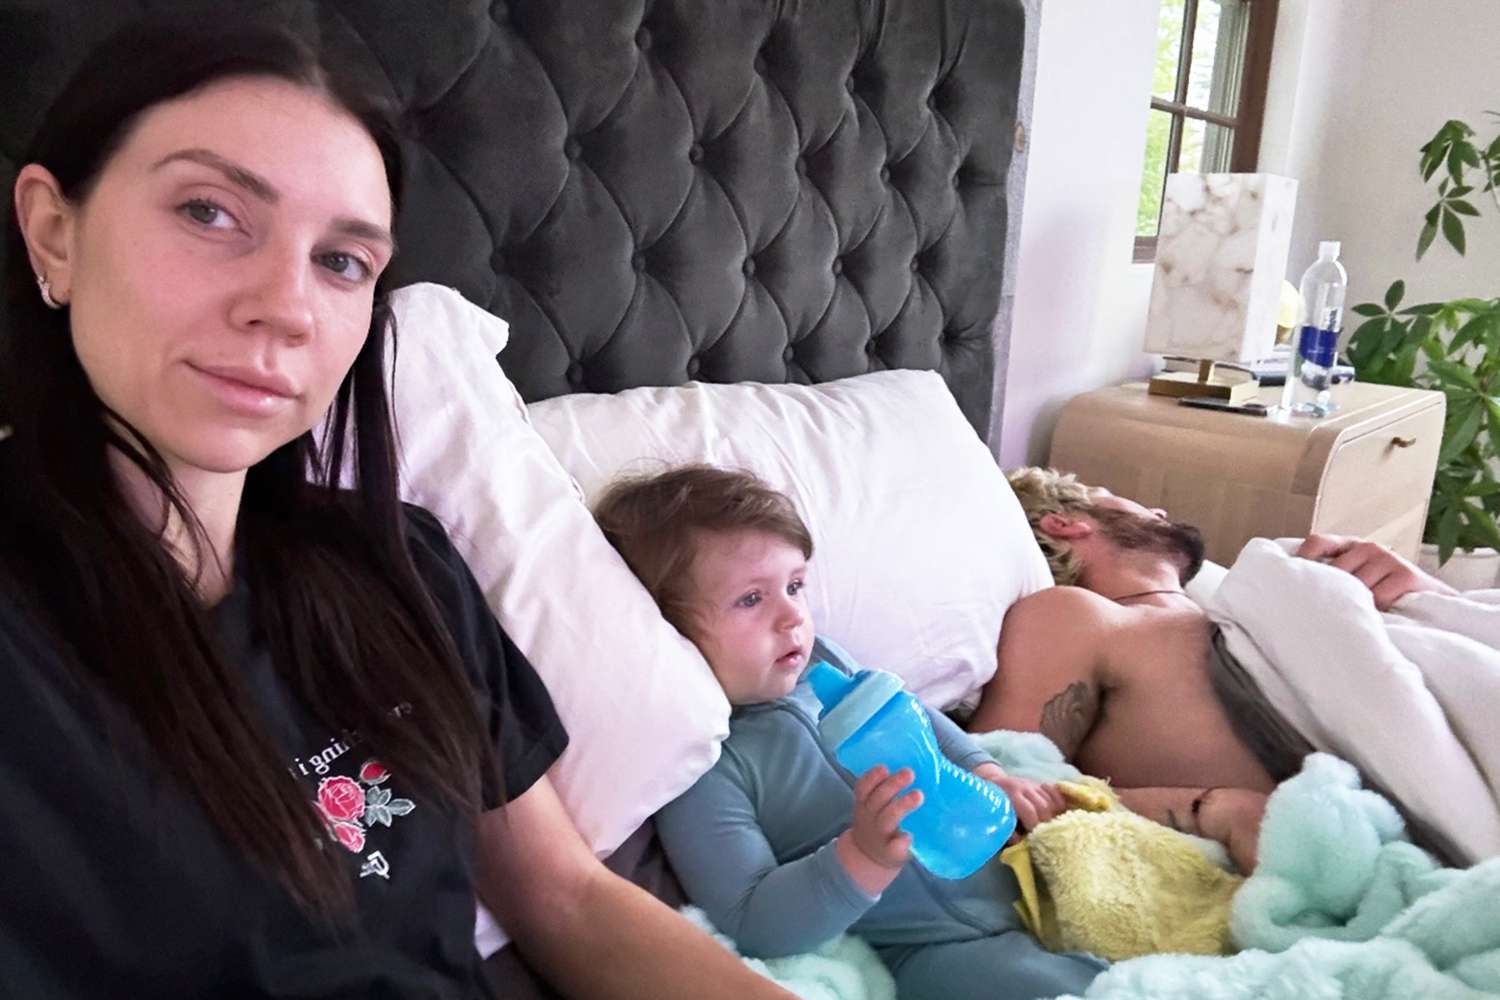 Jenna Johnson's Son Rome Is 'Doing Much Better' After Spending Night in the Ambulance: 'So Insanely Sick'